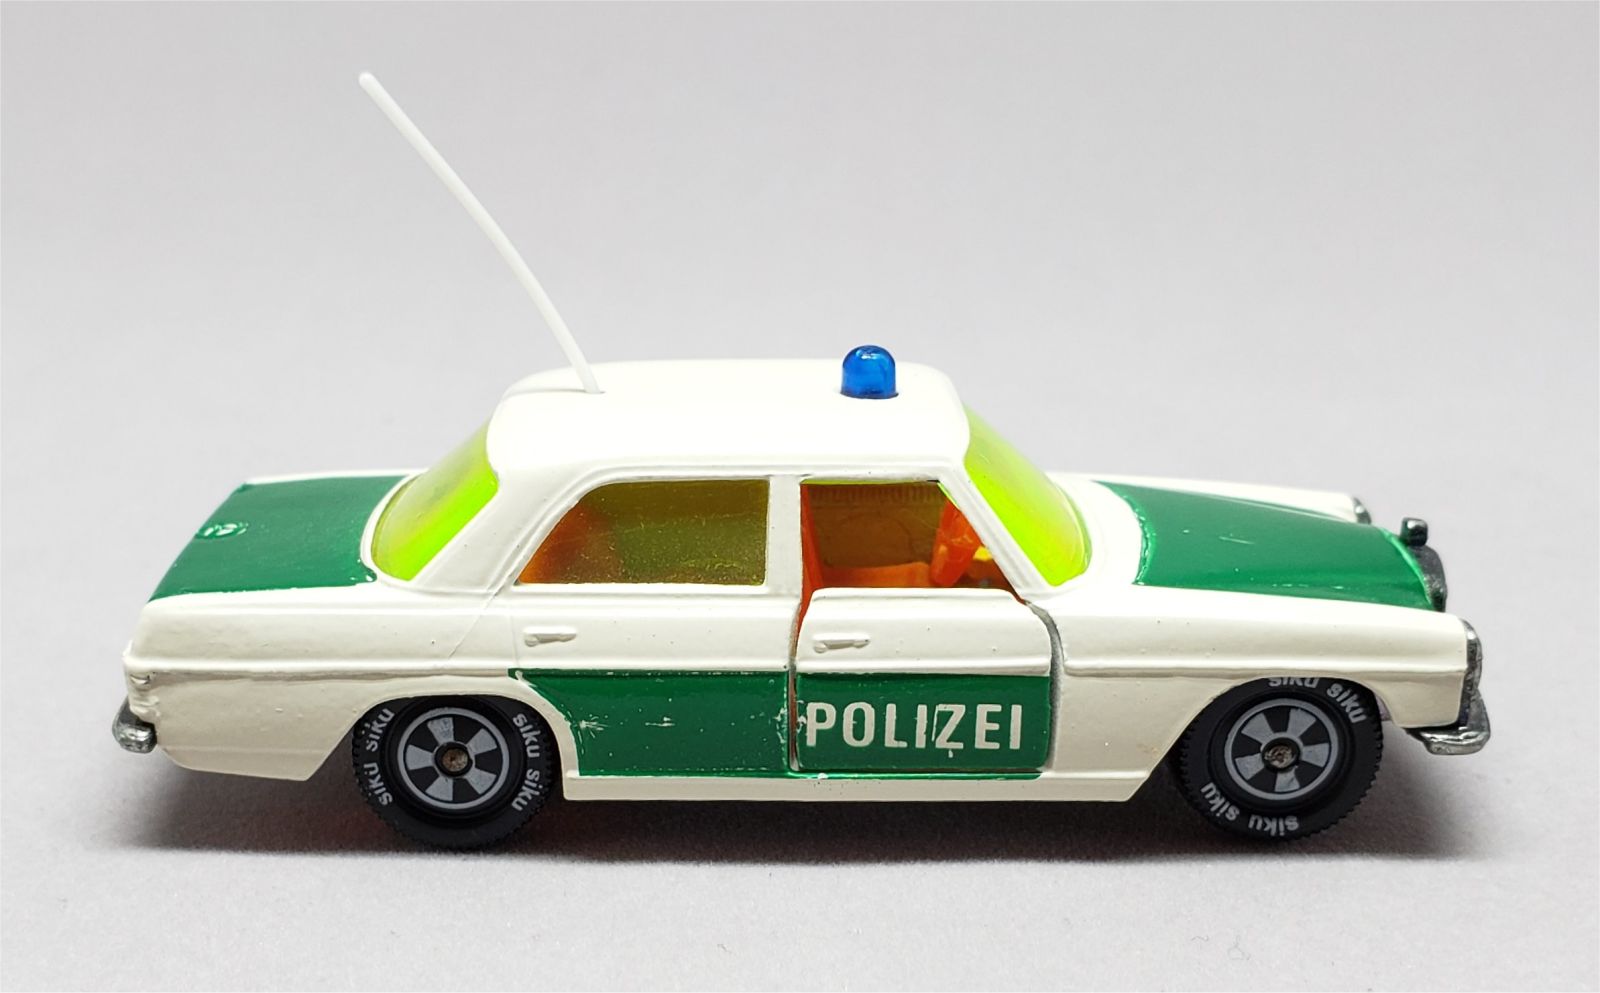 Illustration for article titled [REVIEW] Siku Mercedes-Benz 250 Polizei